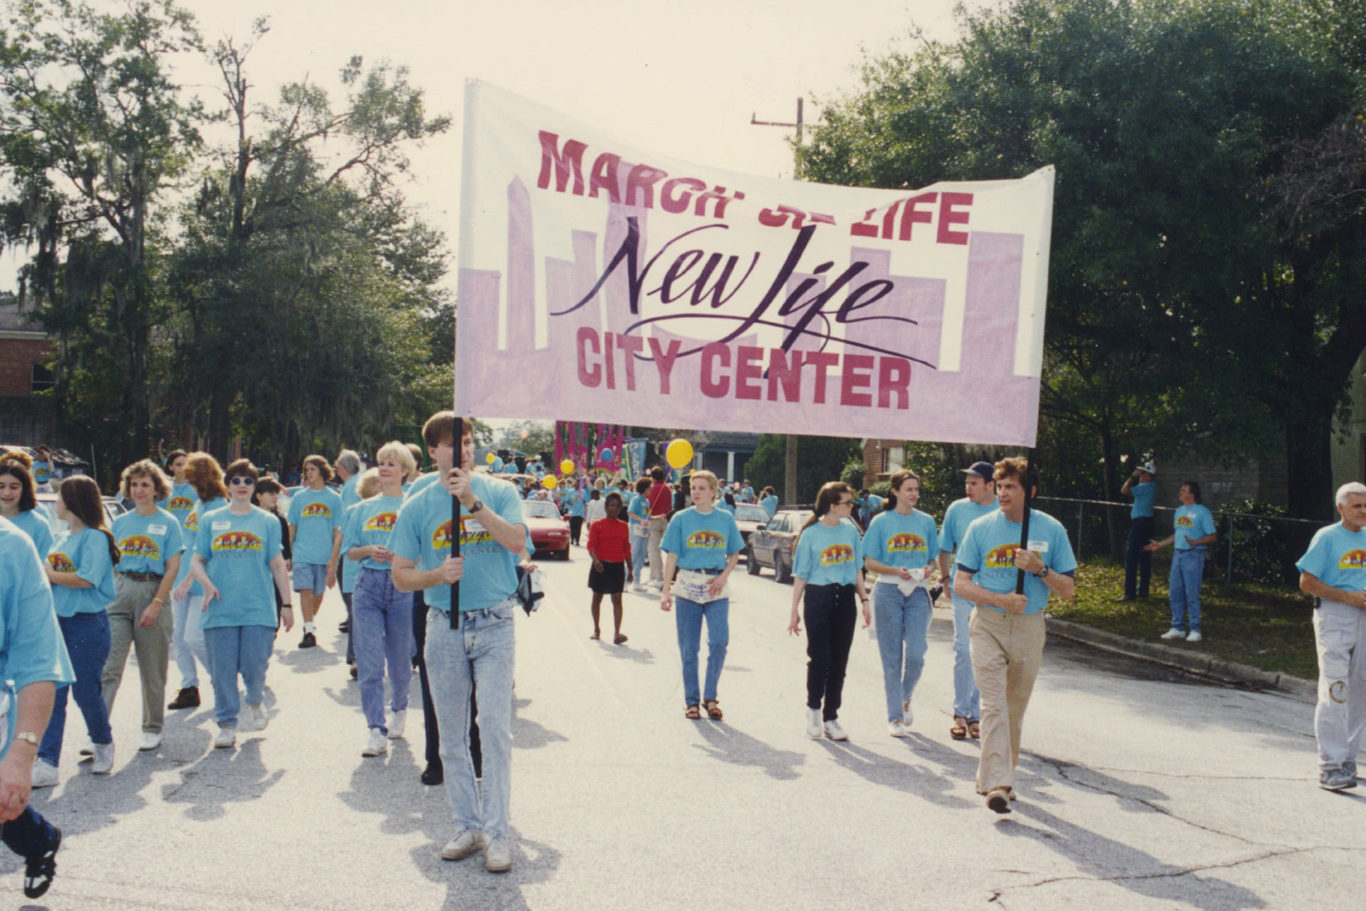 Church members marching in a parade 